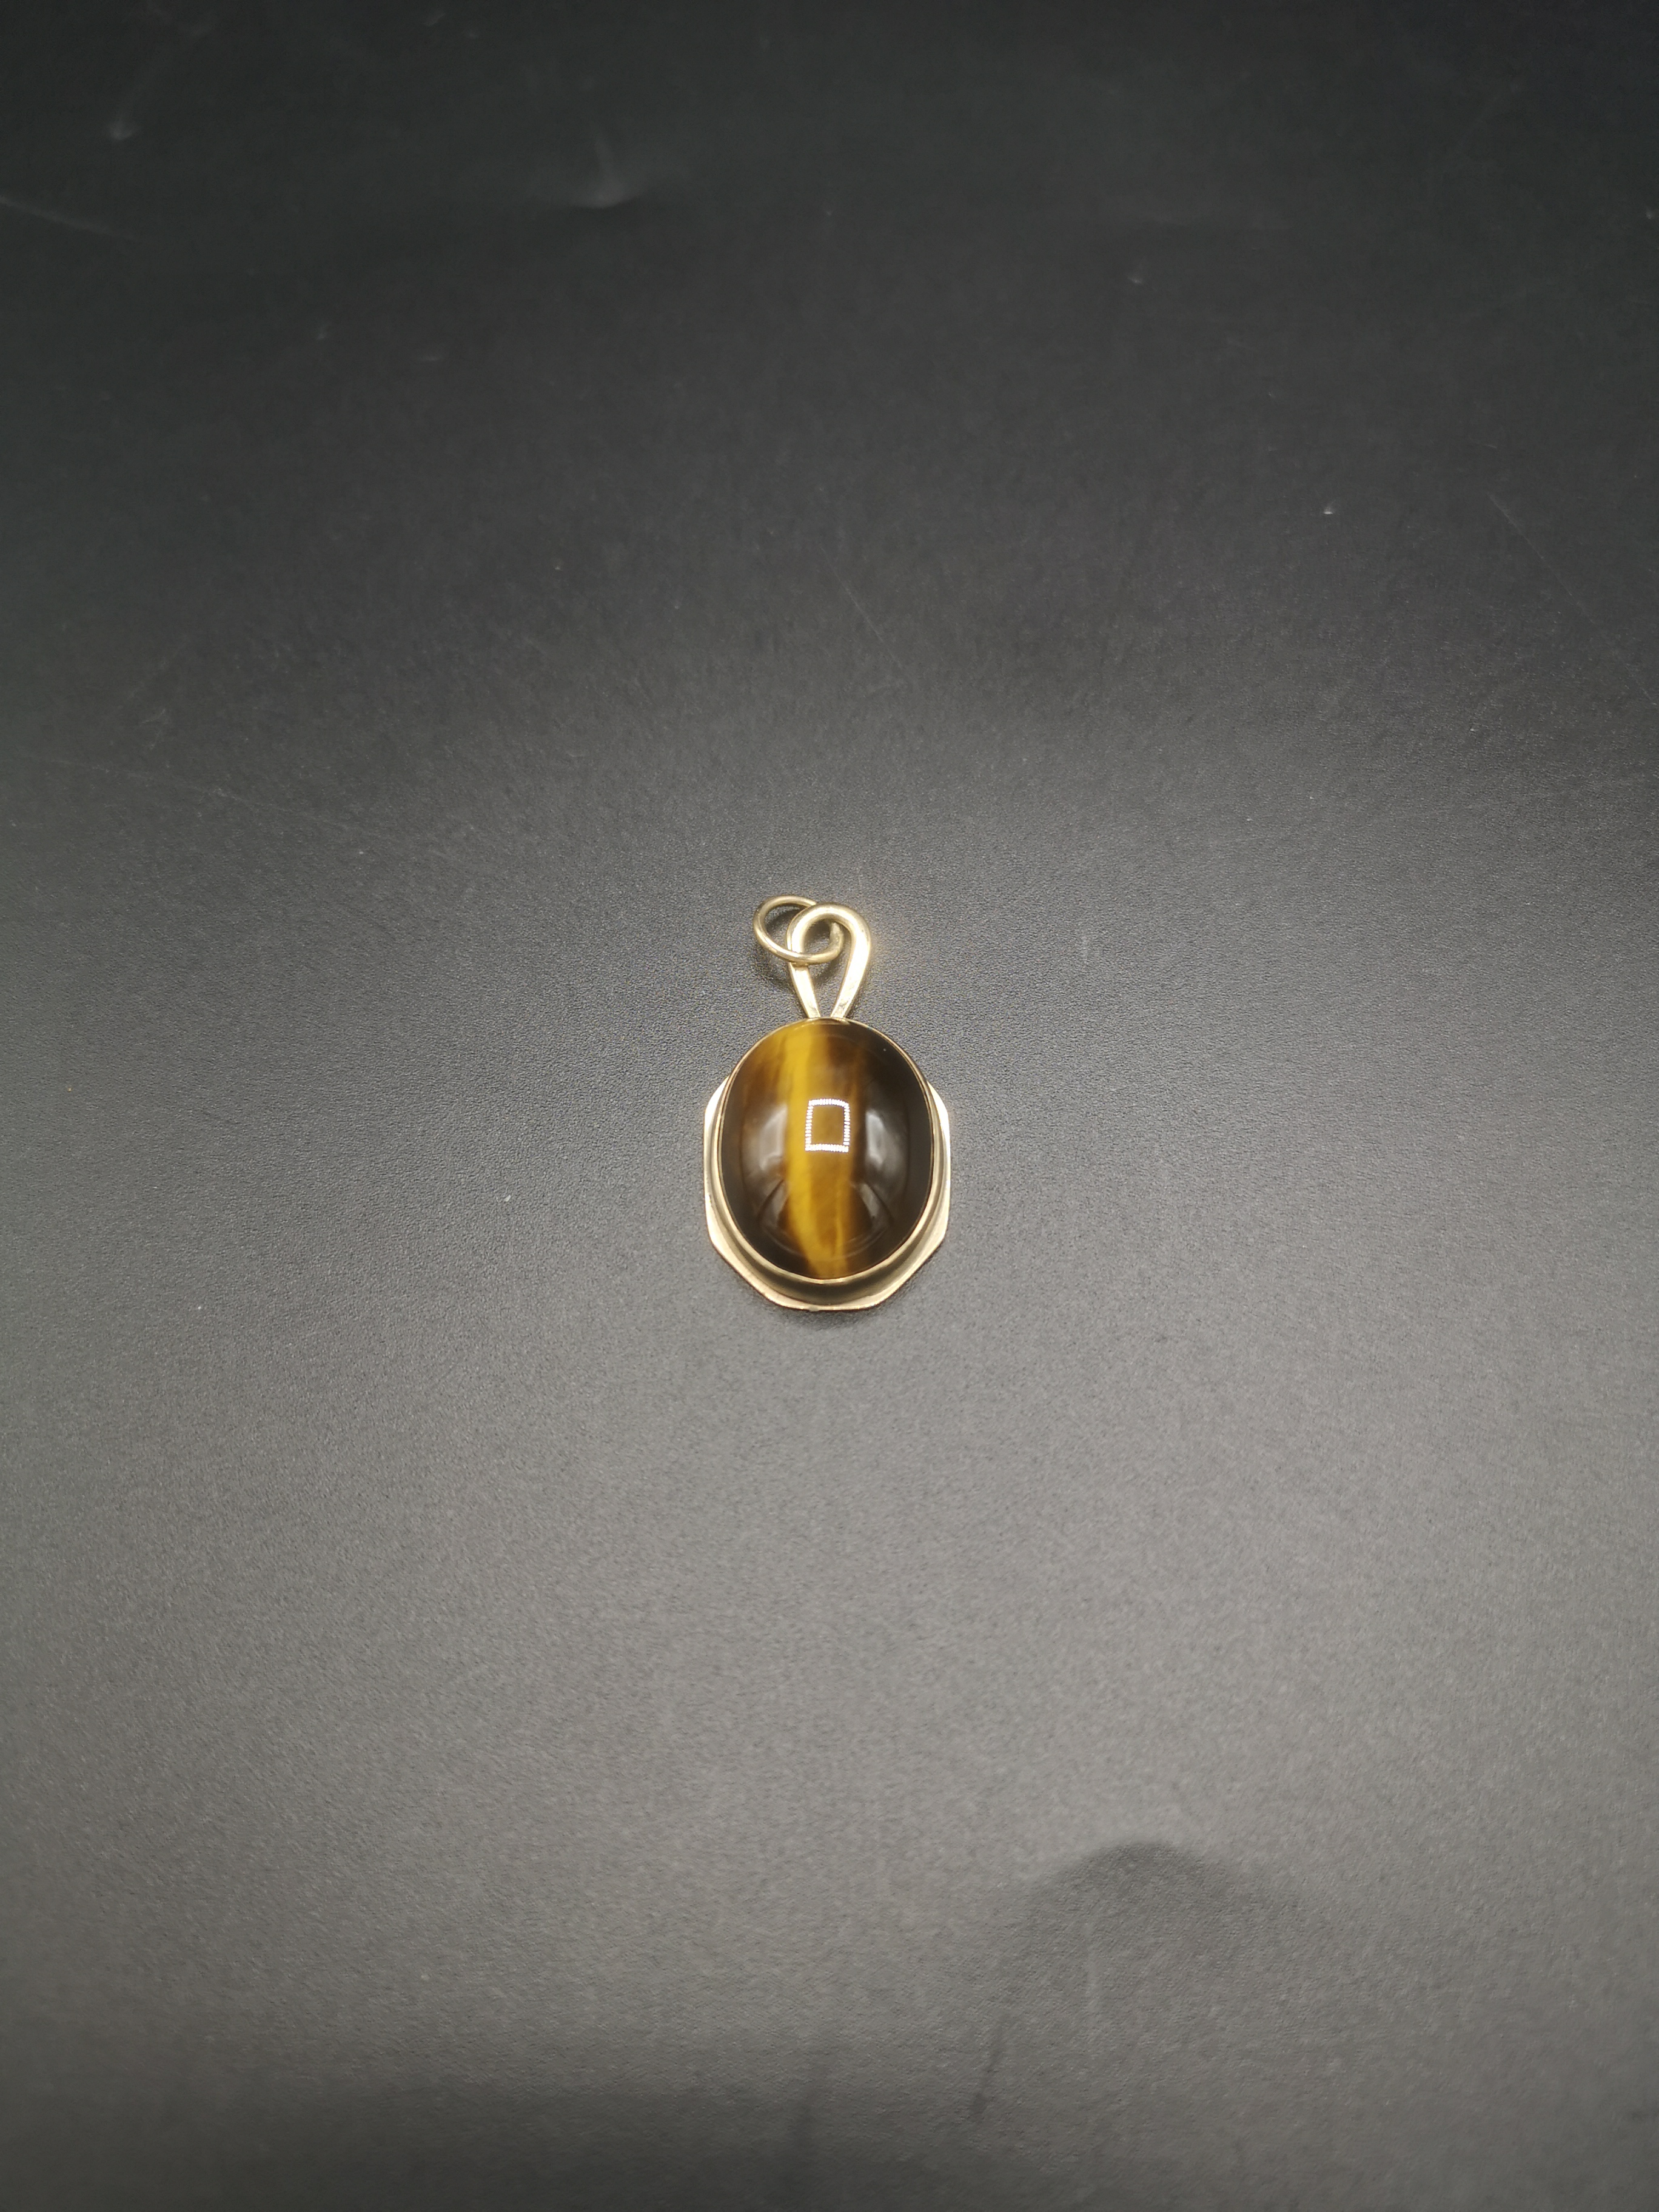 9ct gold pendant set with a tiger's eye - Image 2 of 5